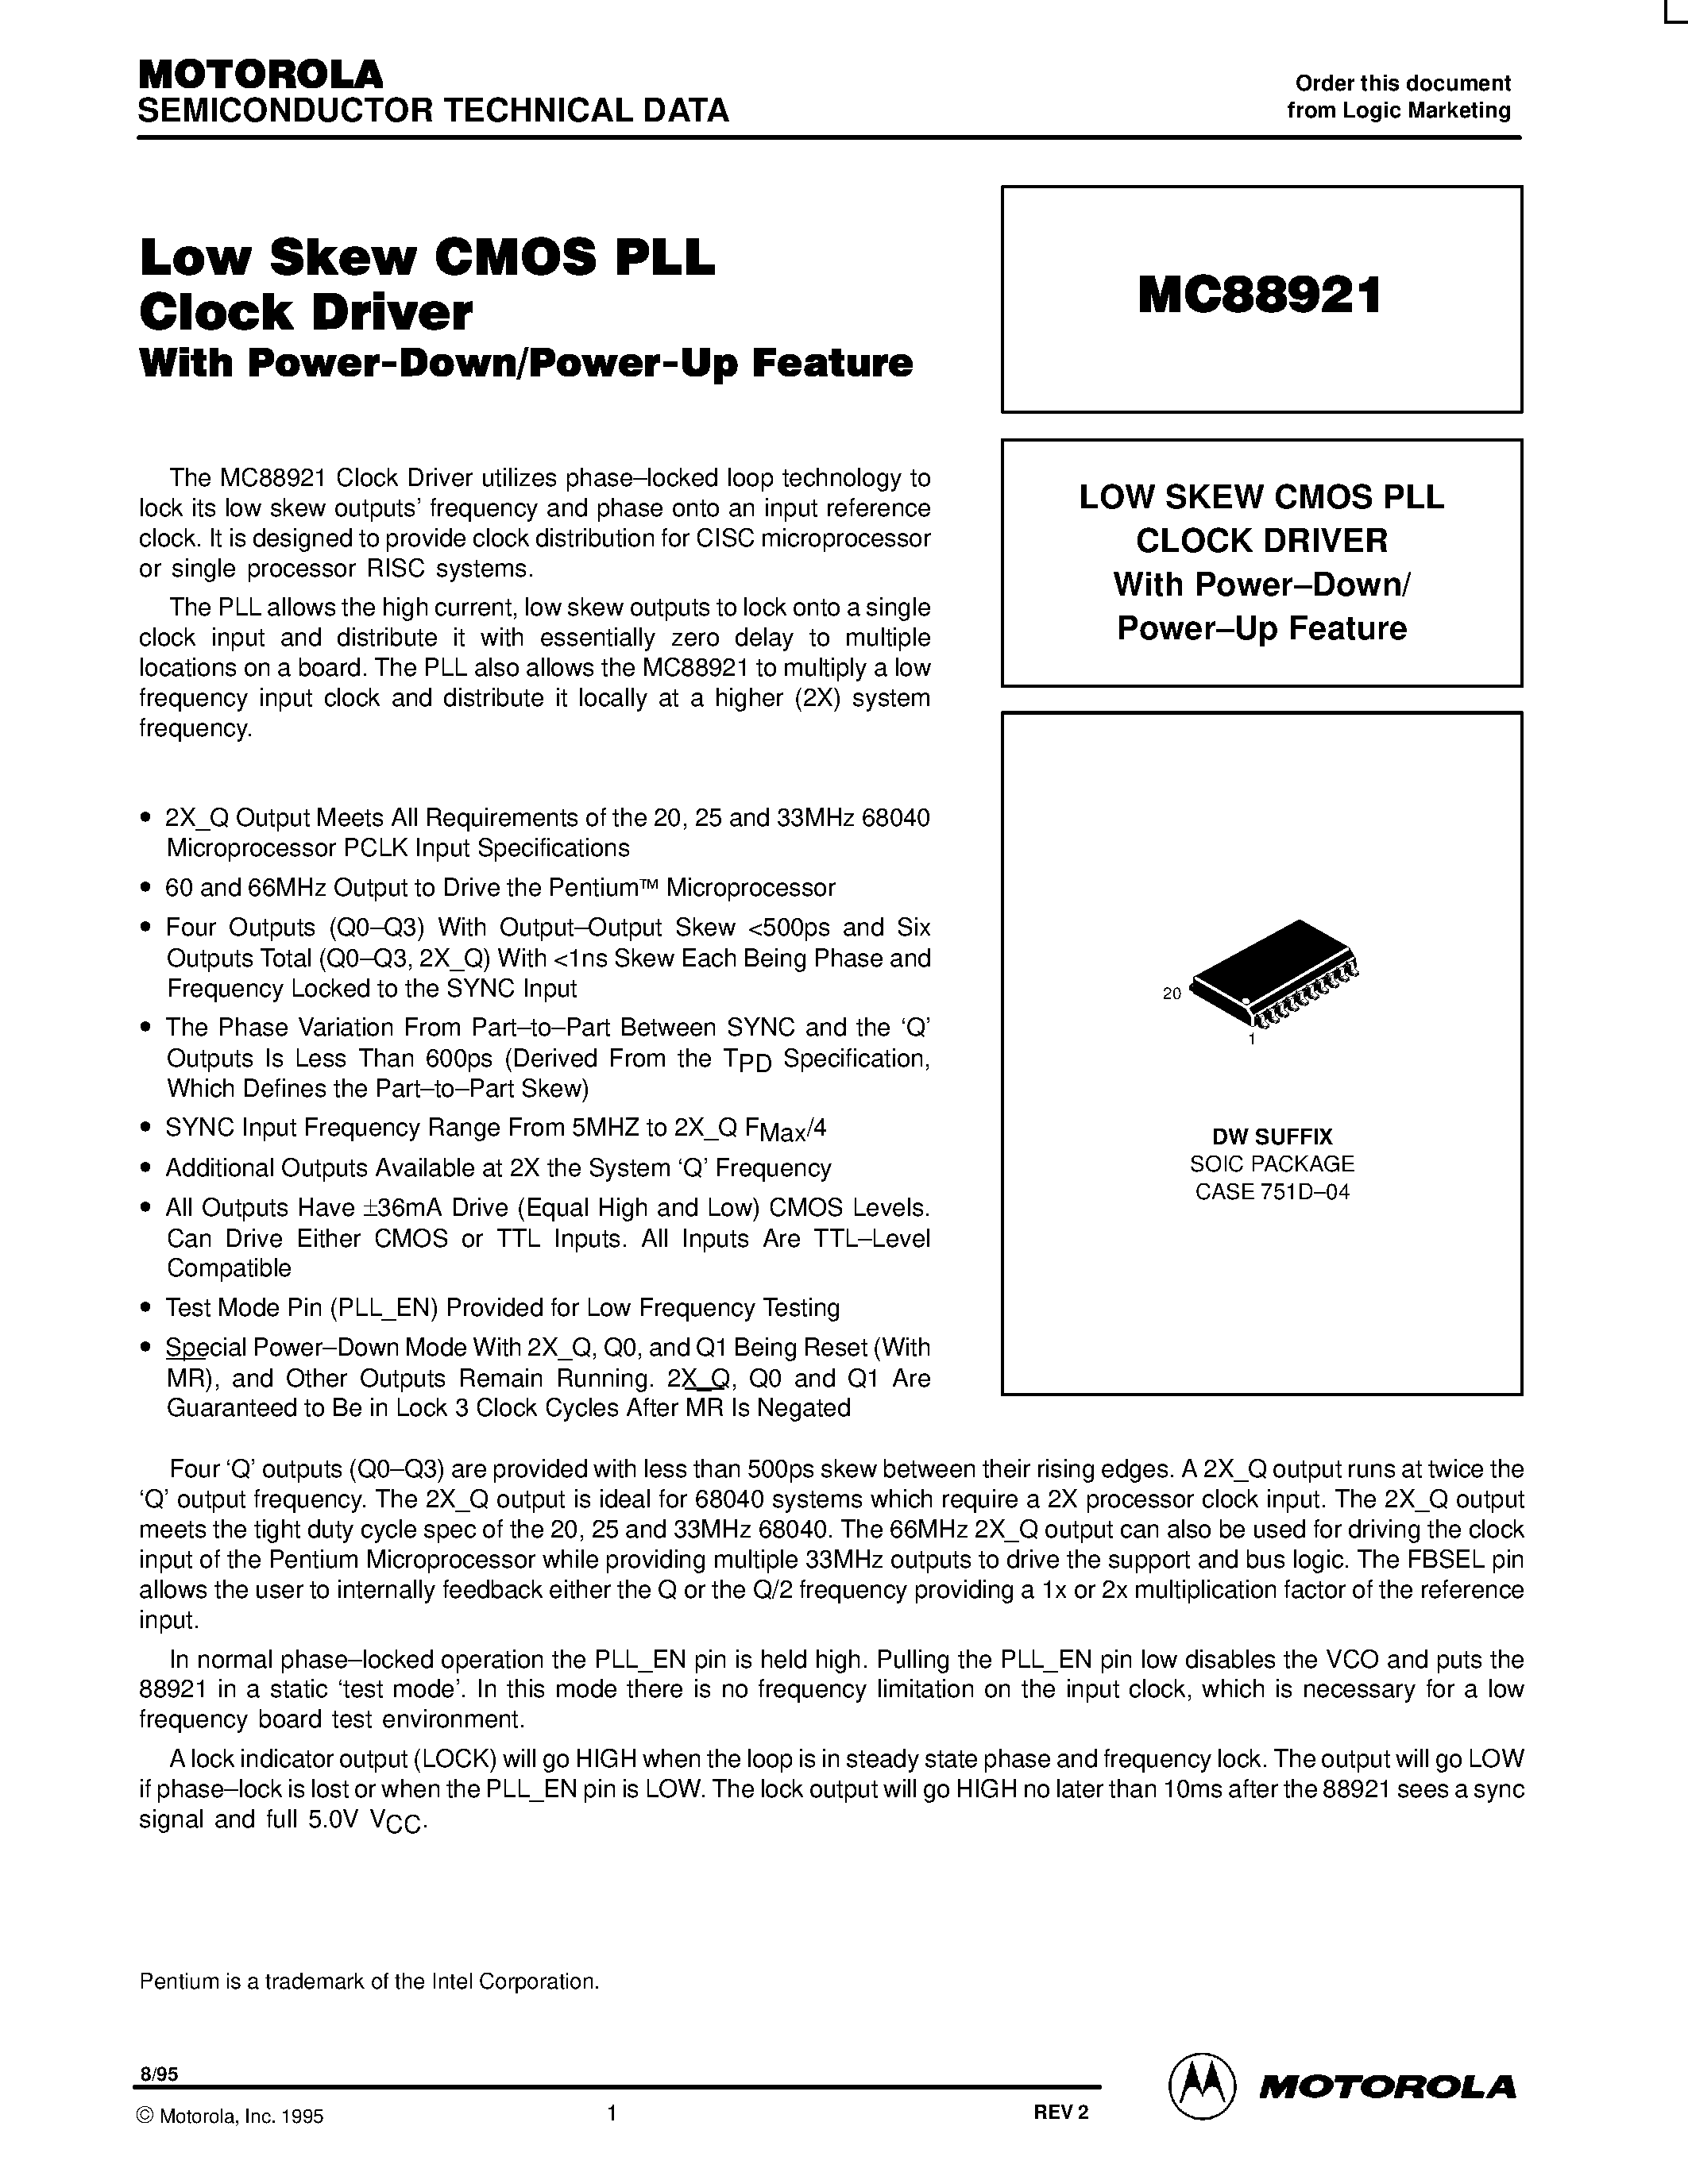 Datasheet MC88921 - LOW SKEW CMOS PLL CLOCK DRIVER With Power-Down/ Power-Up Feature page 1